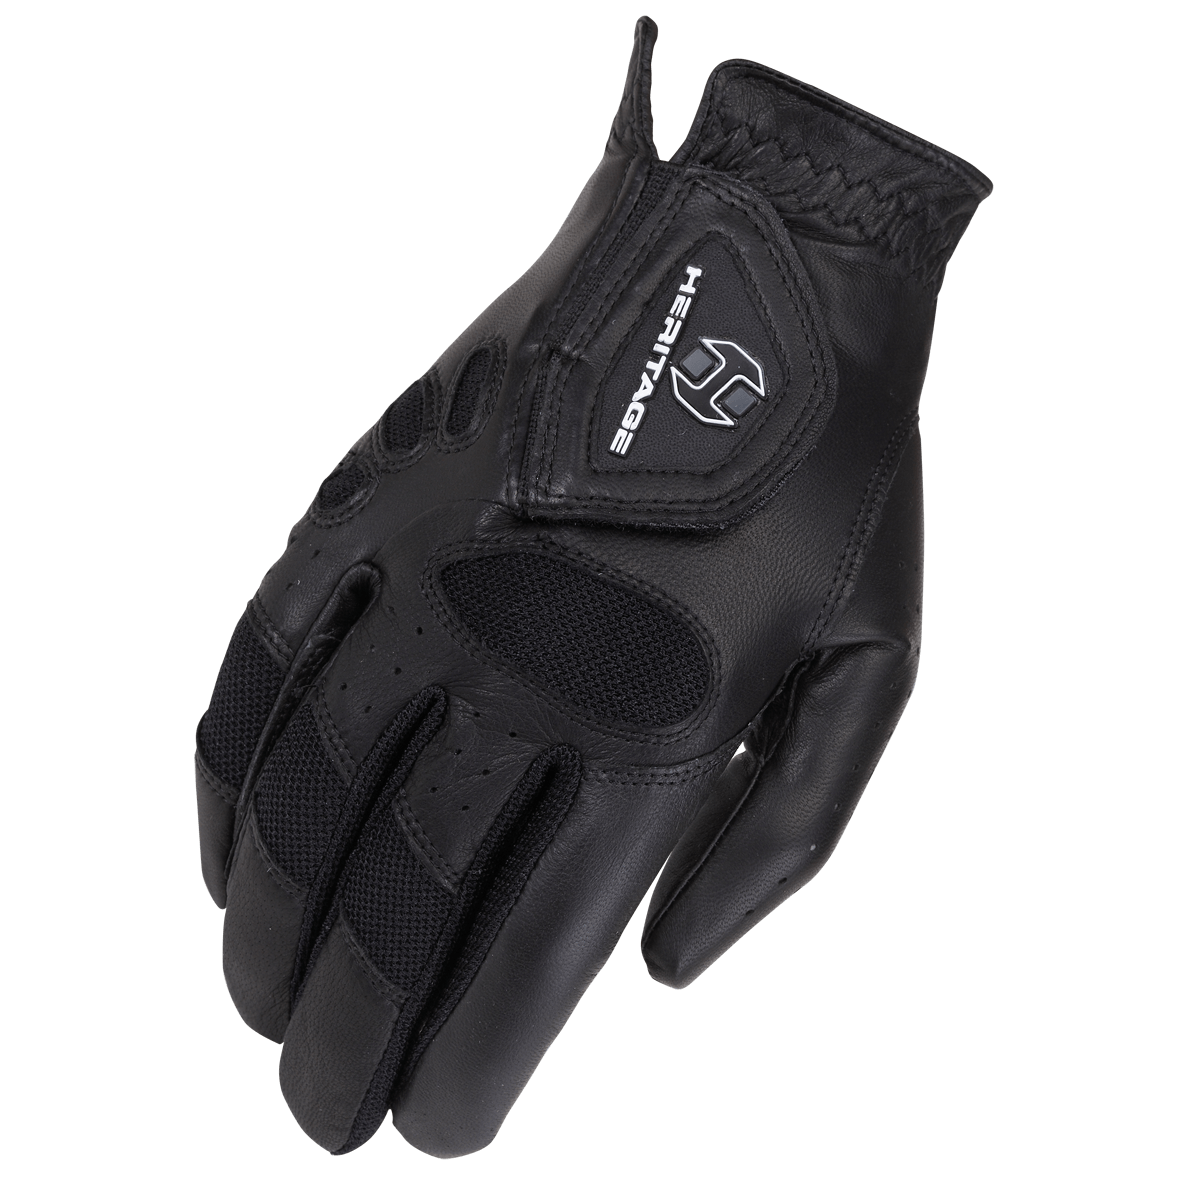 Tackified Pro-Air Show Glove